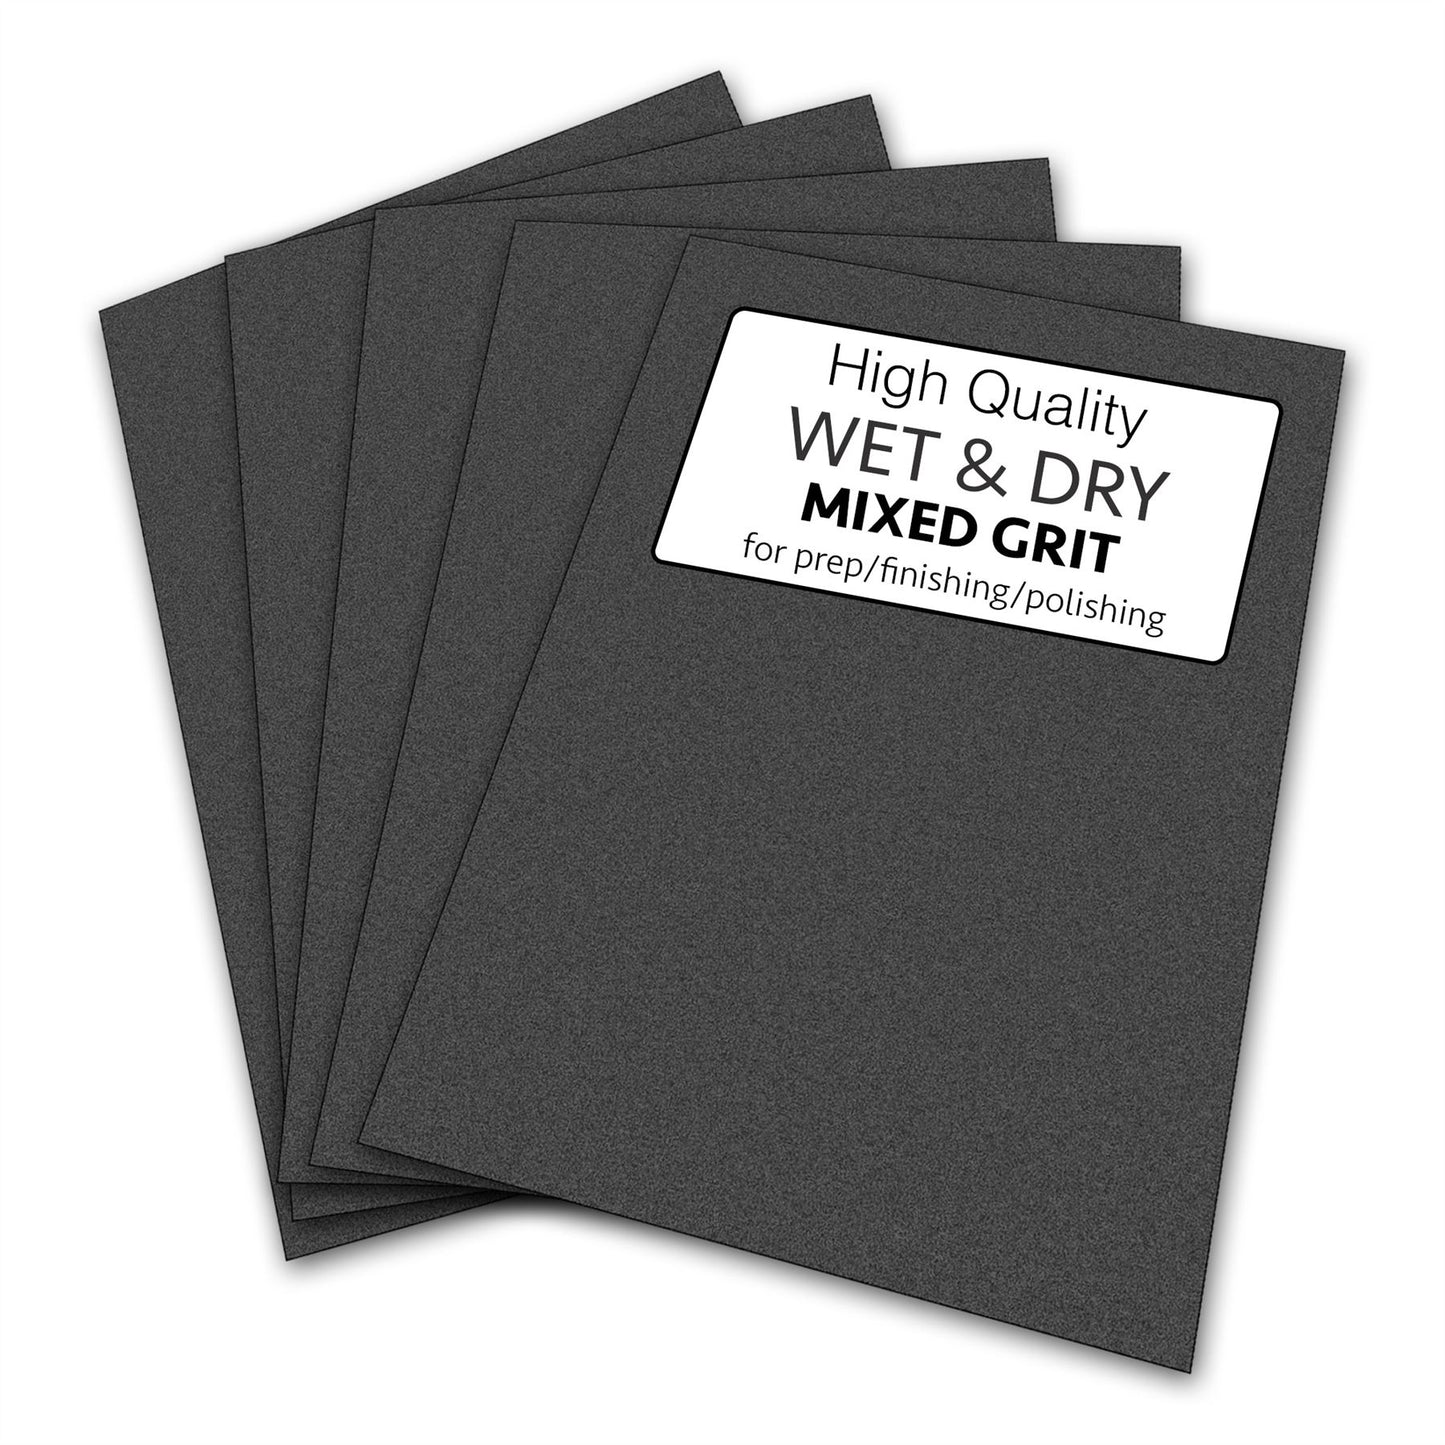 Wet & Dry Sandpaper 10 sheets - Mixed Grit